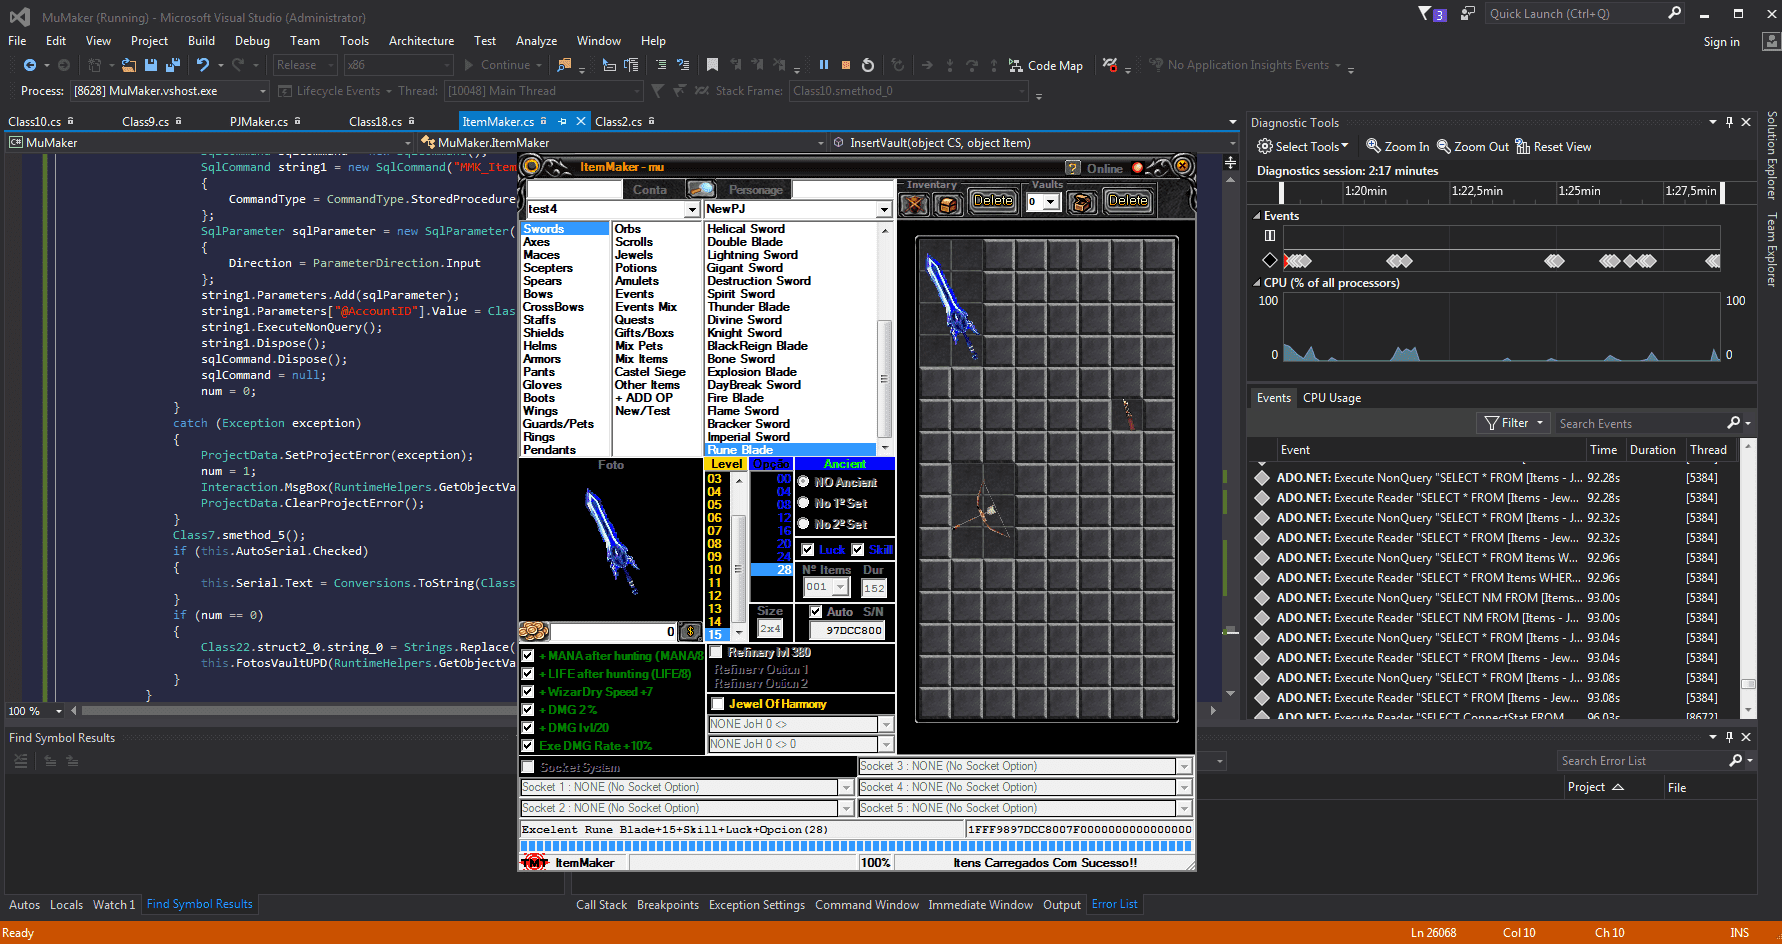 n1rYLe5 - [Release] Zyth3 CashShop Editor (decompiled source code) - RaGEZONE Forums